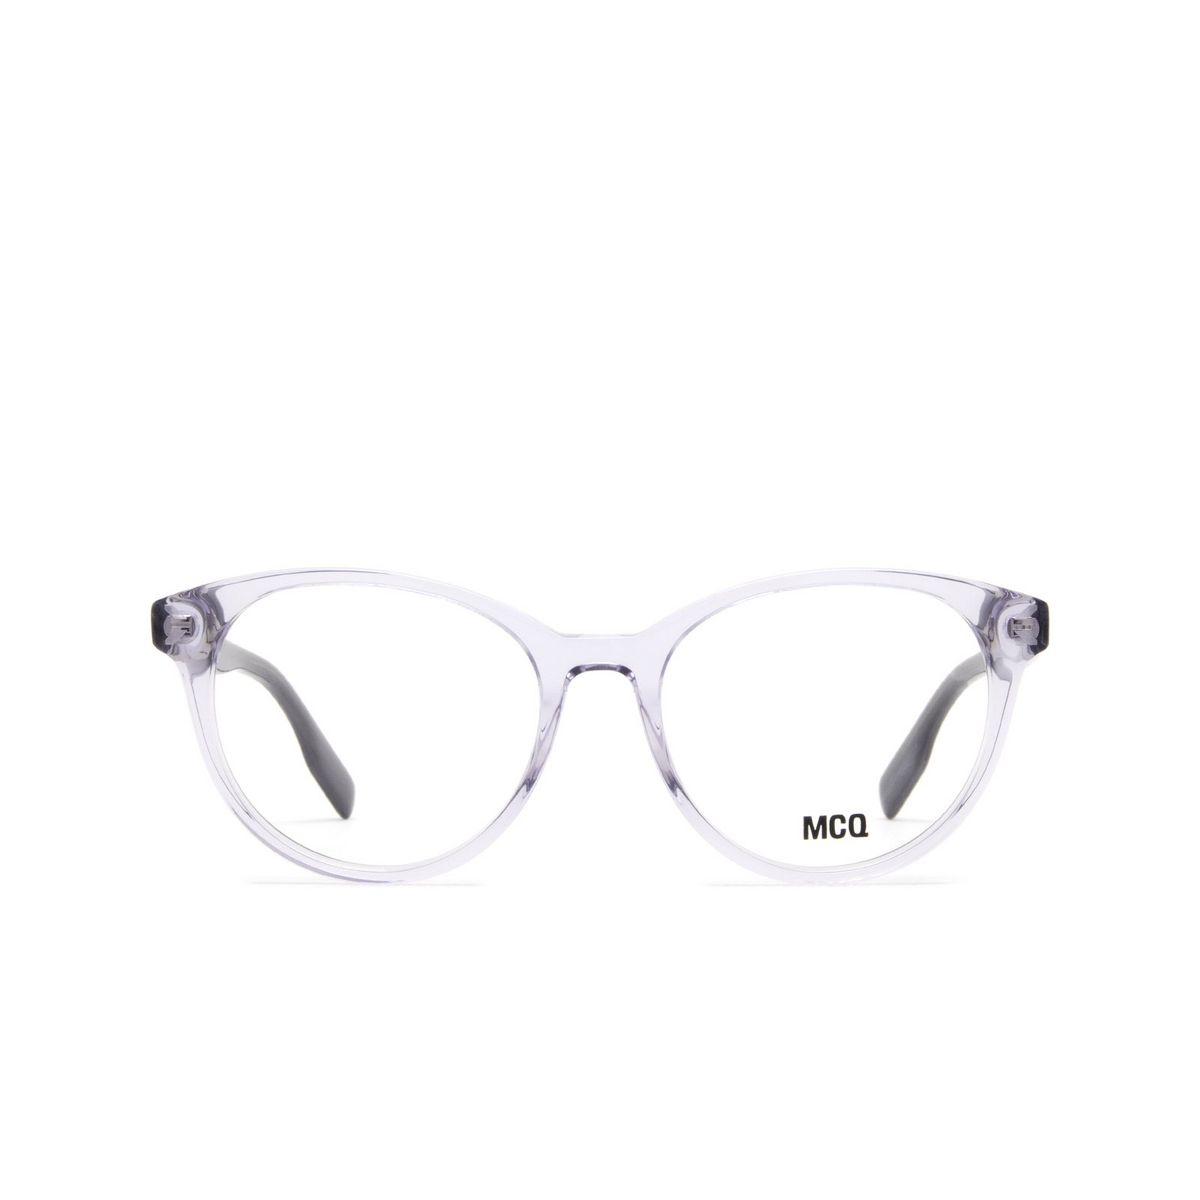 Alexander McQueen® Round Eyeglasses: MQ0308O color 007 Grey - front view